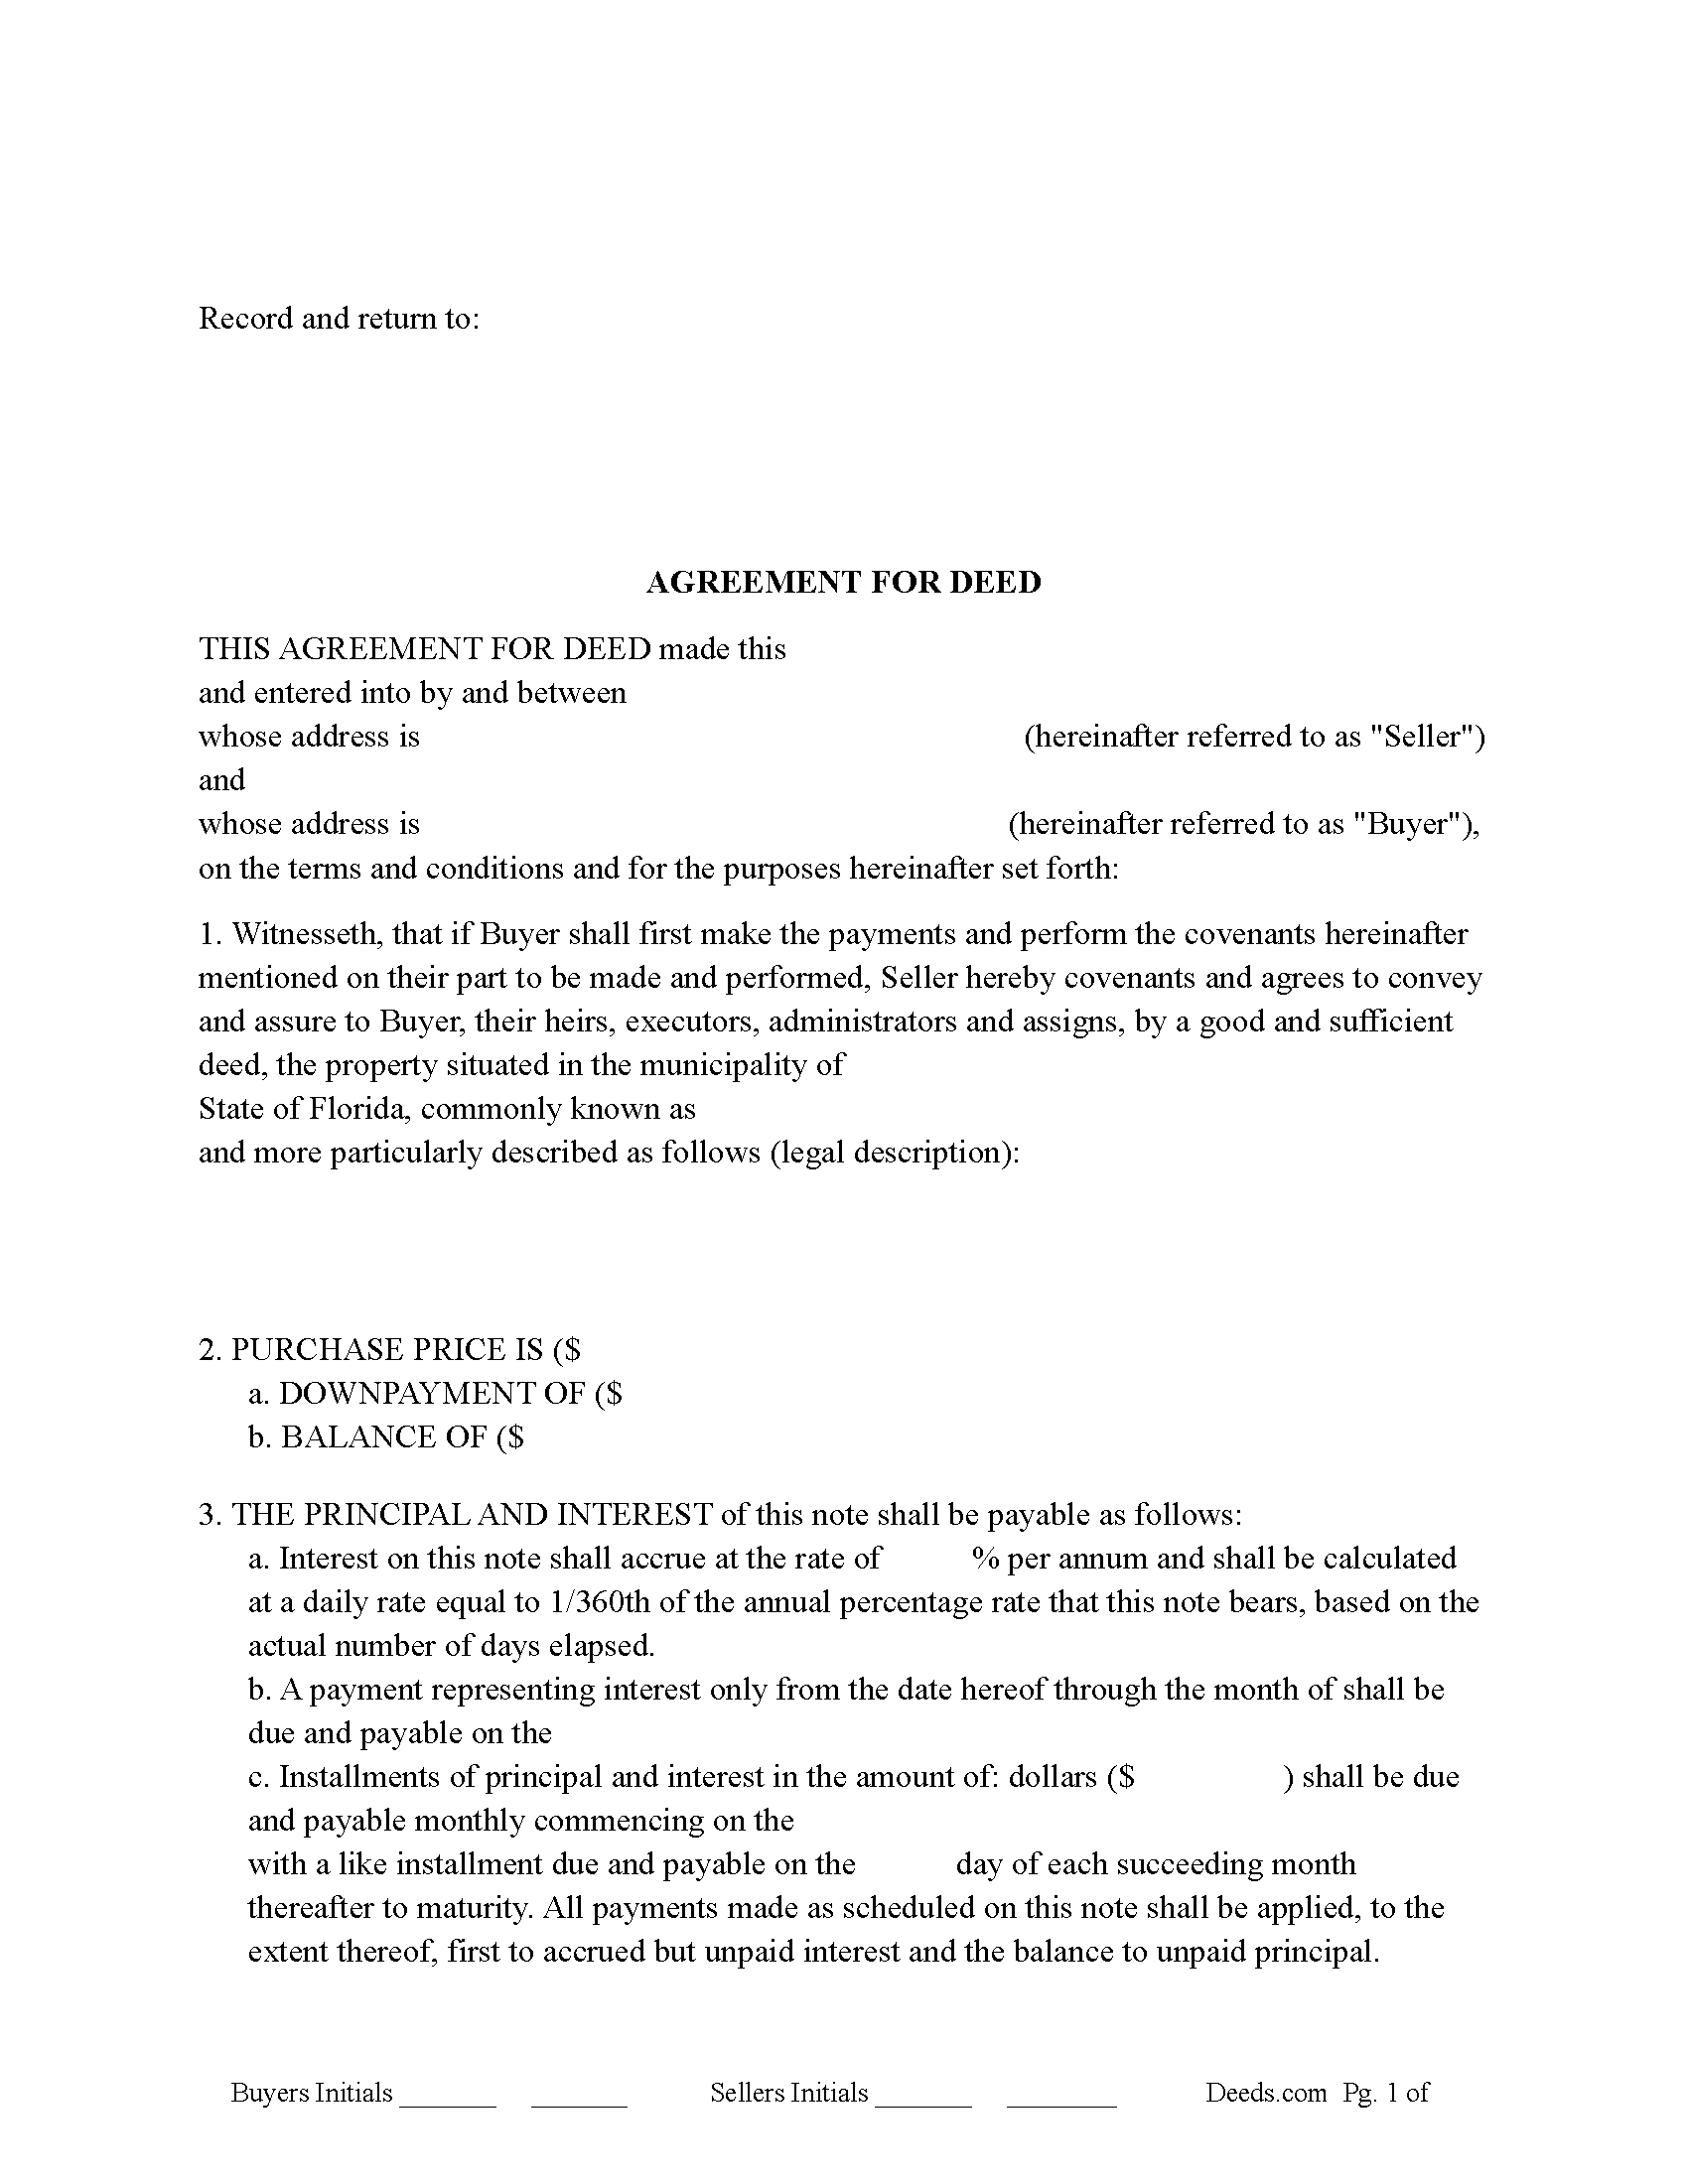 Florida Agreement for Deed Image